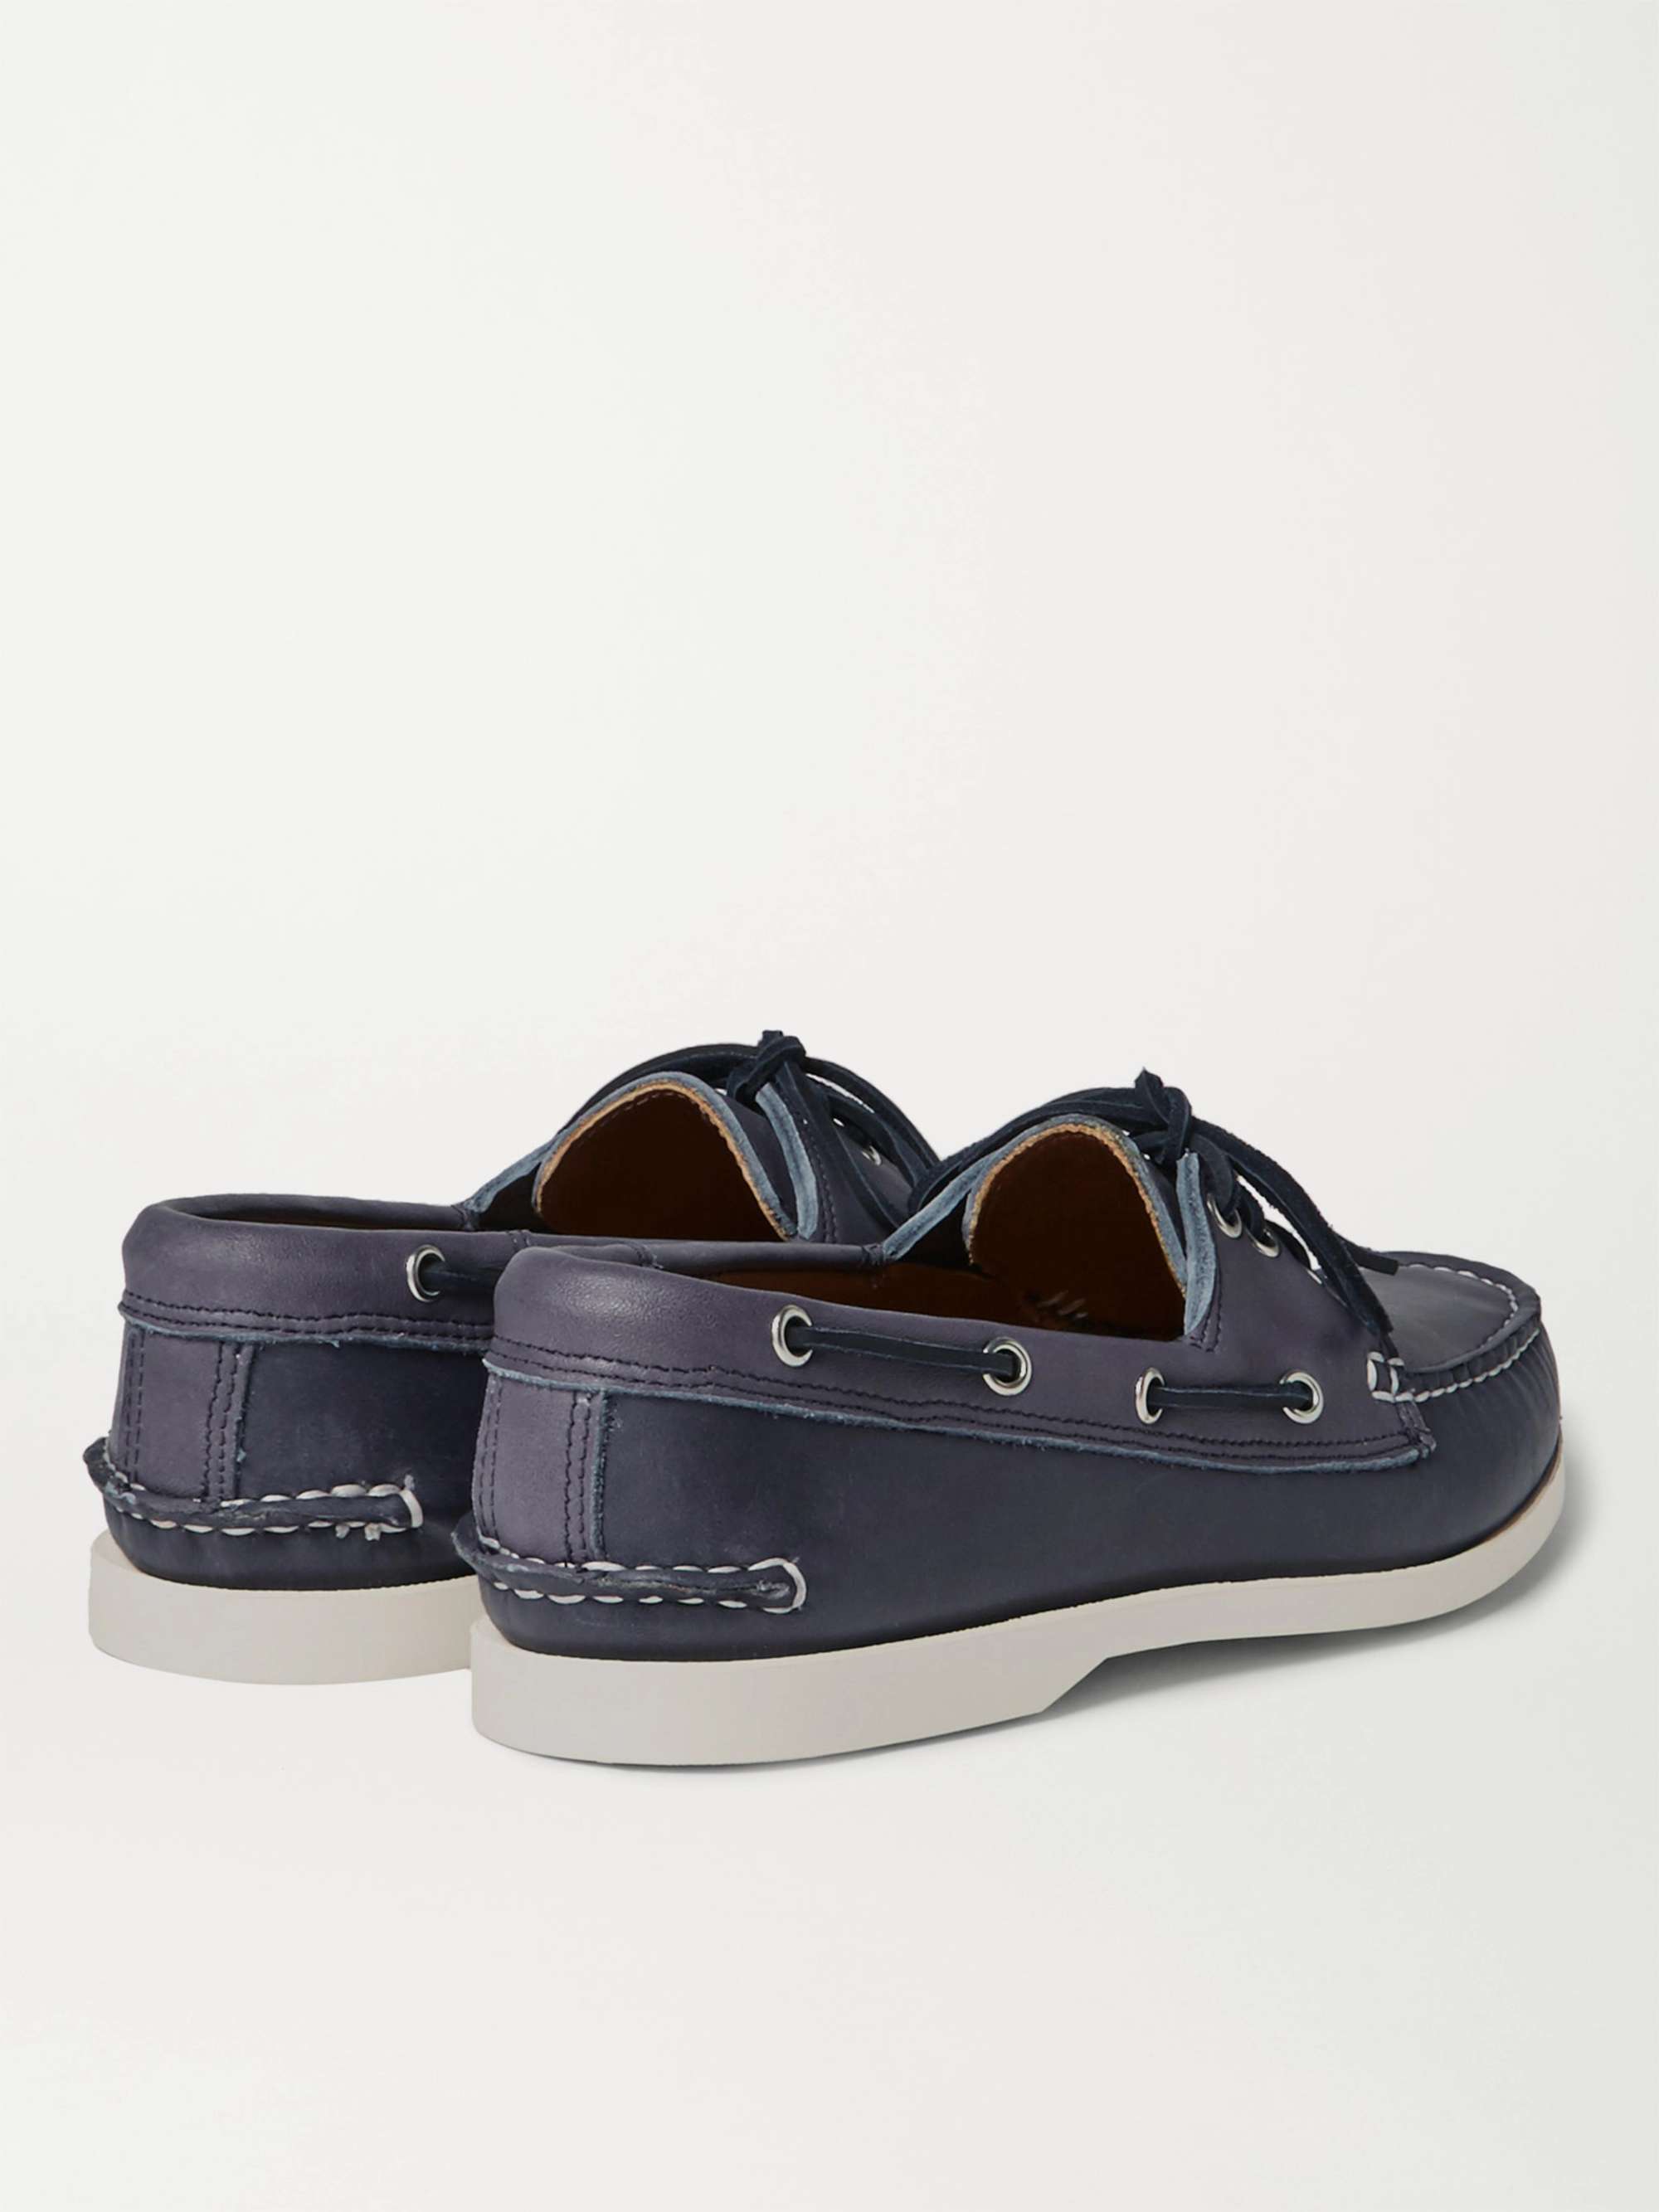 QUODDY Downeast Leather Boat Shoes